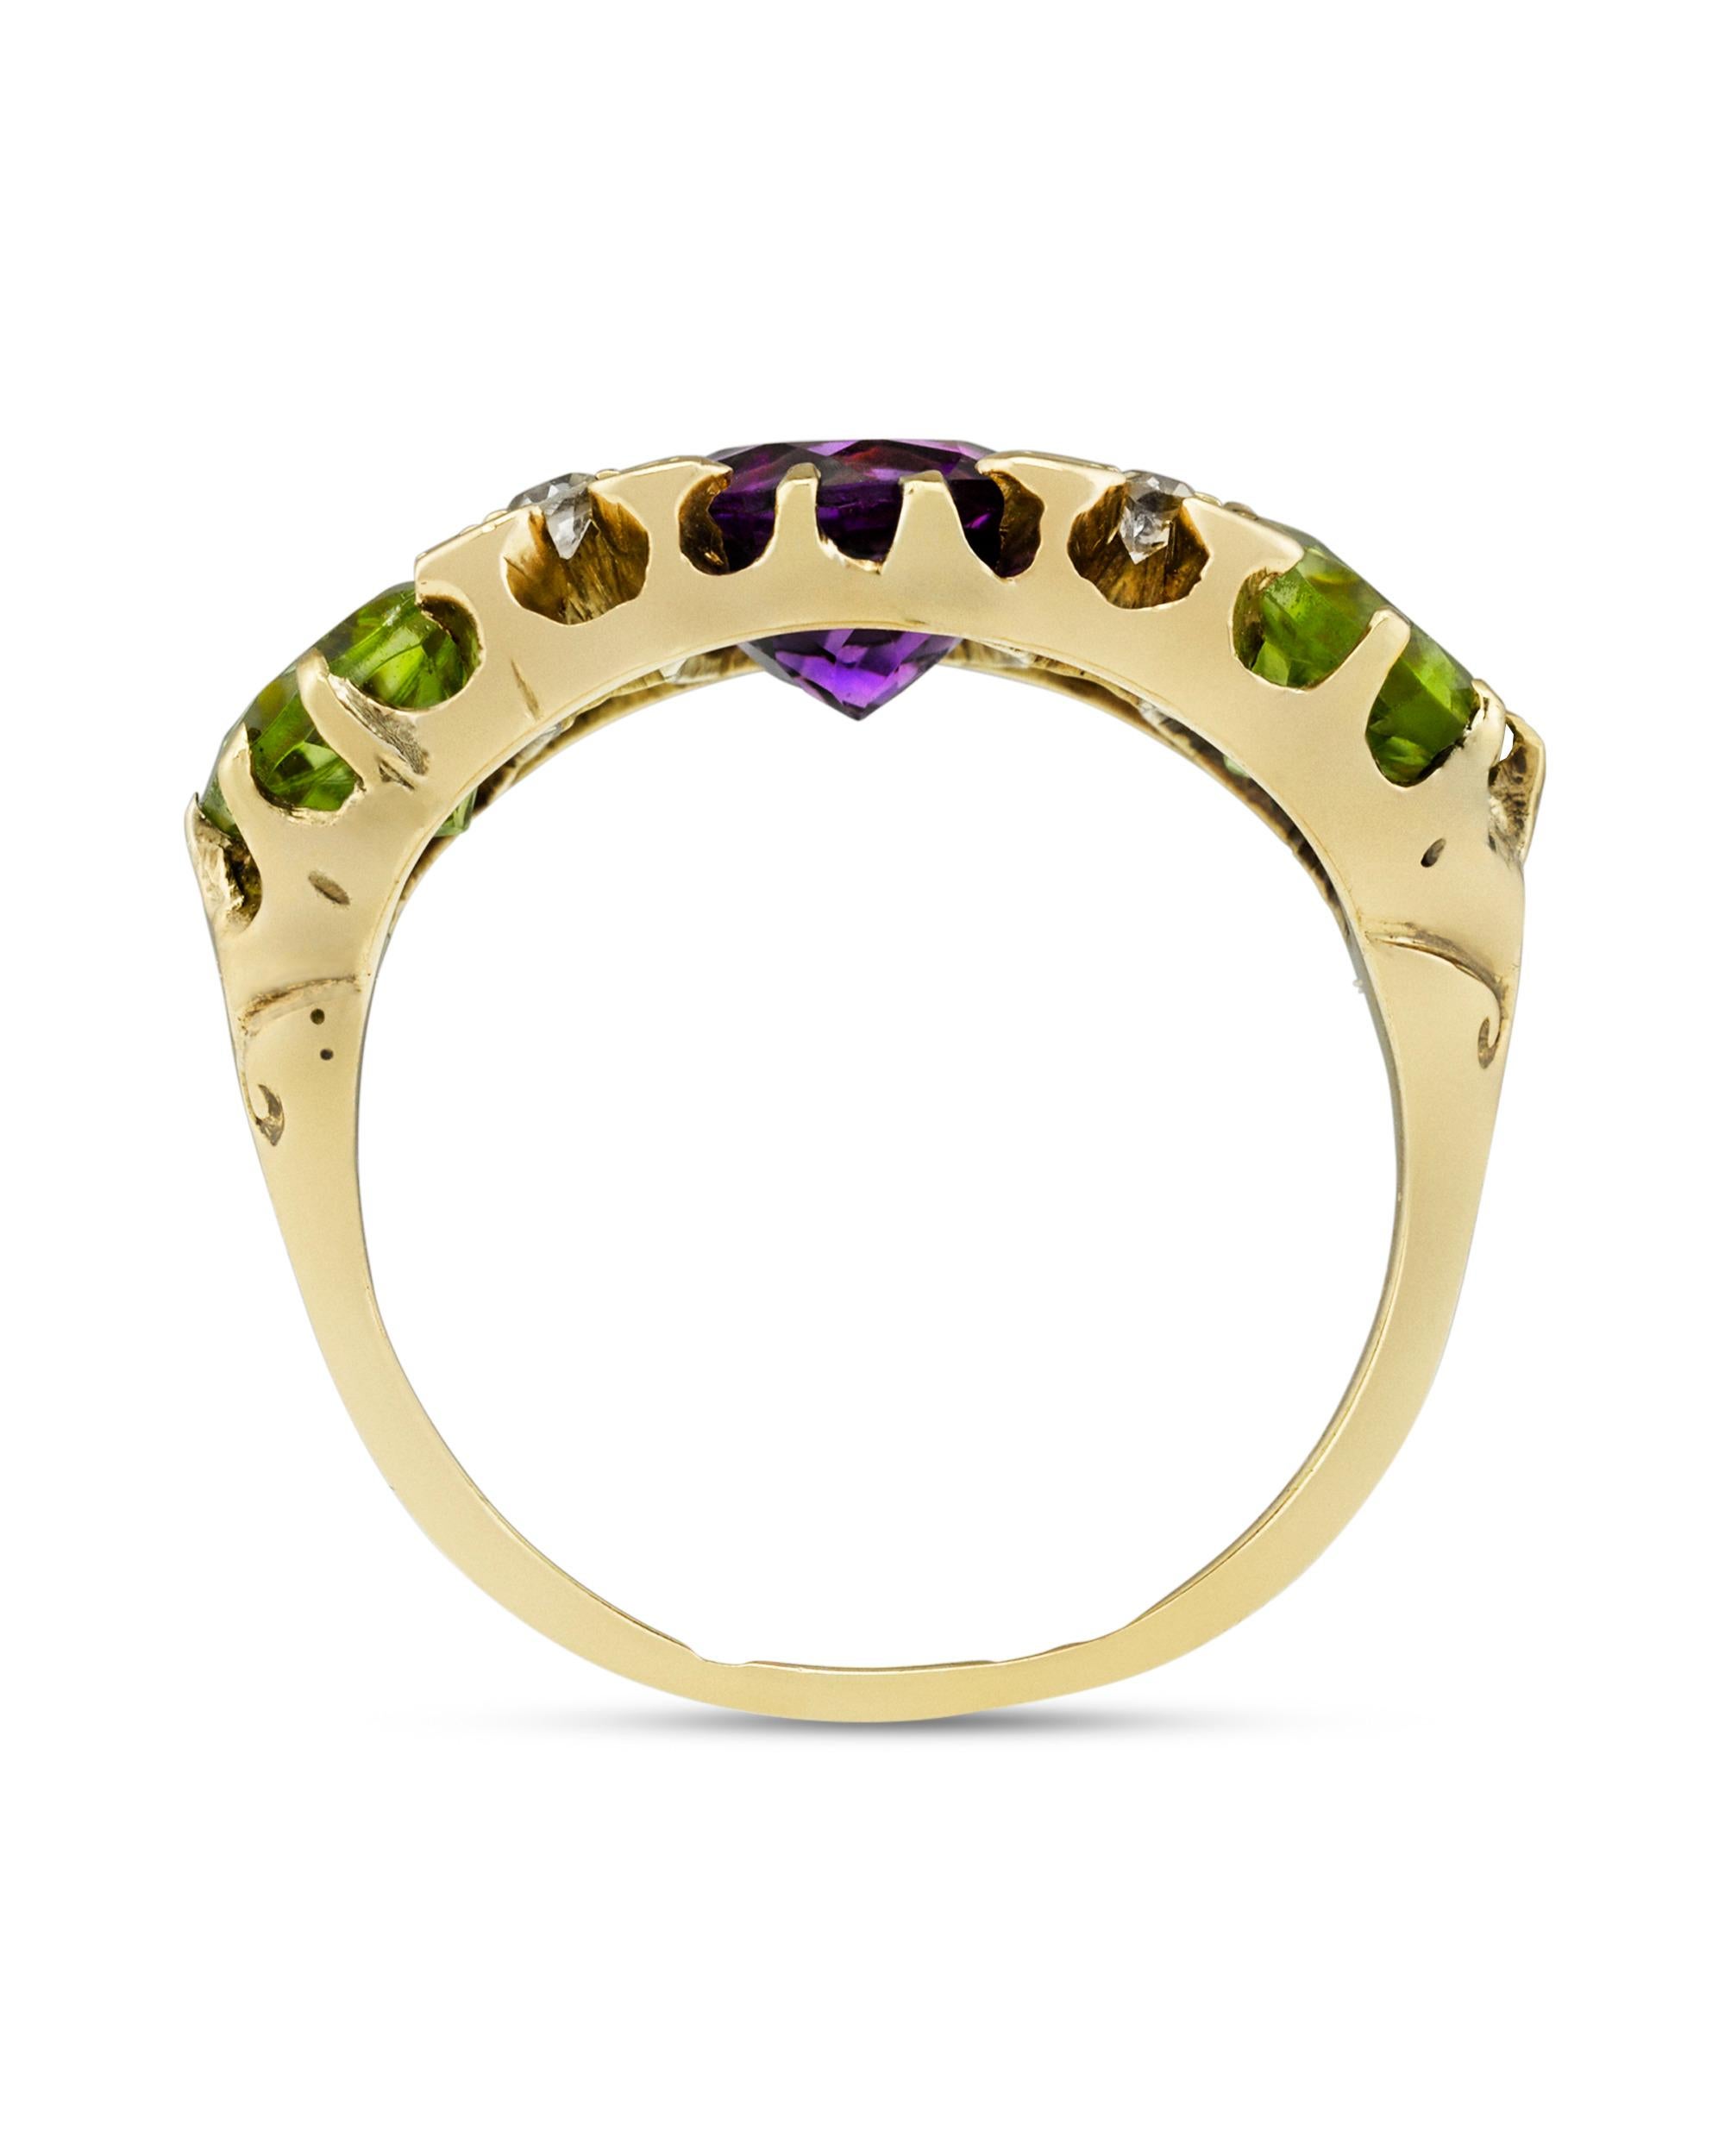 Victorian Amethyst, Peridot and Diamond Suffragette Ring, 1.70 Carat